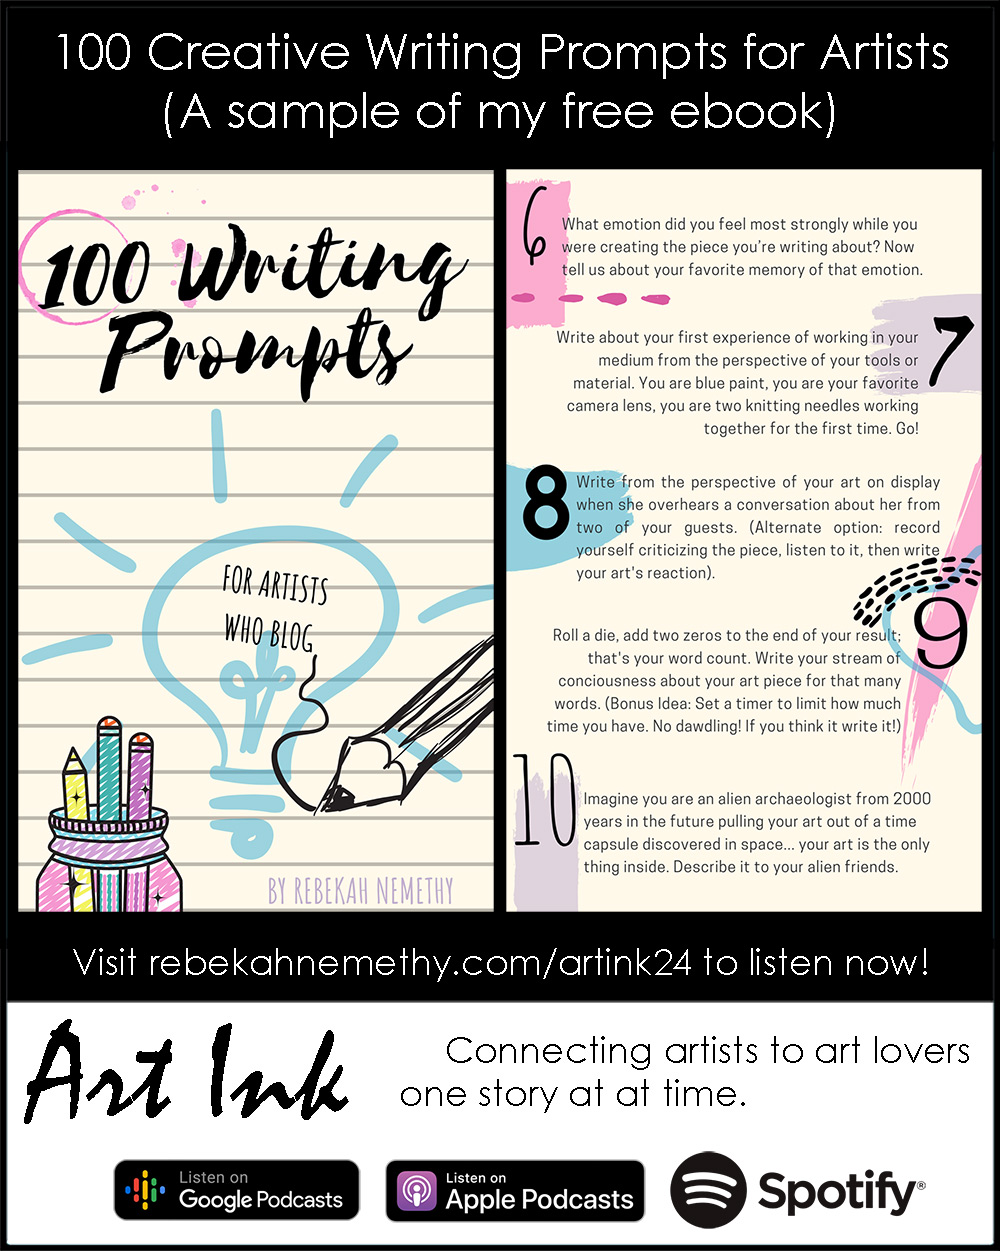 41 Funny, Romantic, and Scary Creative Writing Prompts - HobbyLark